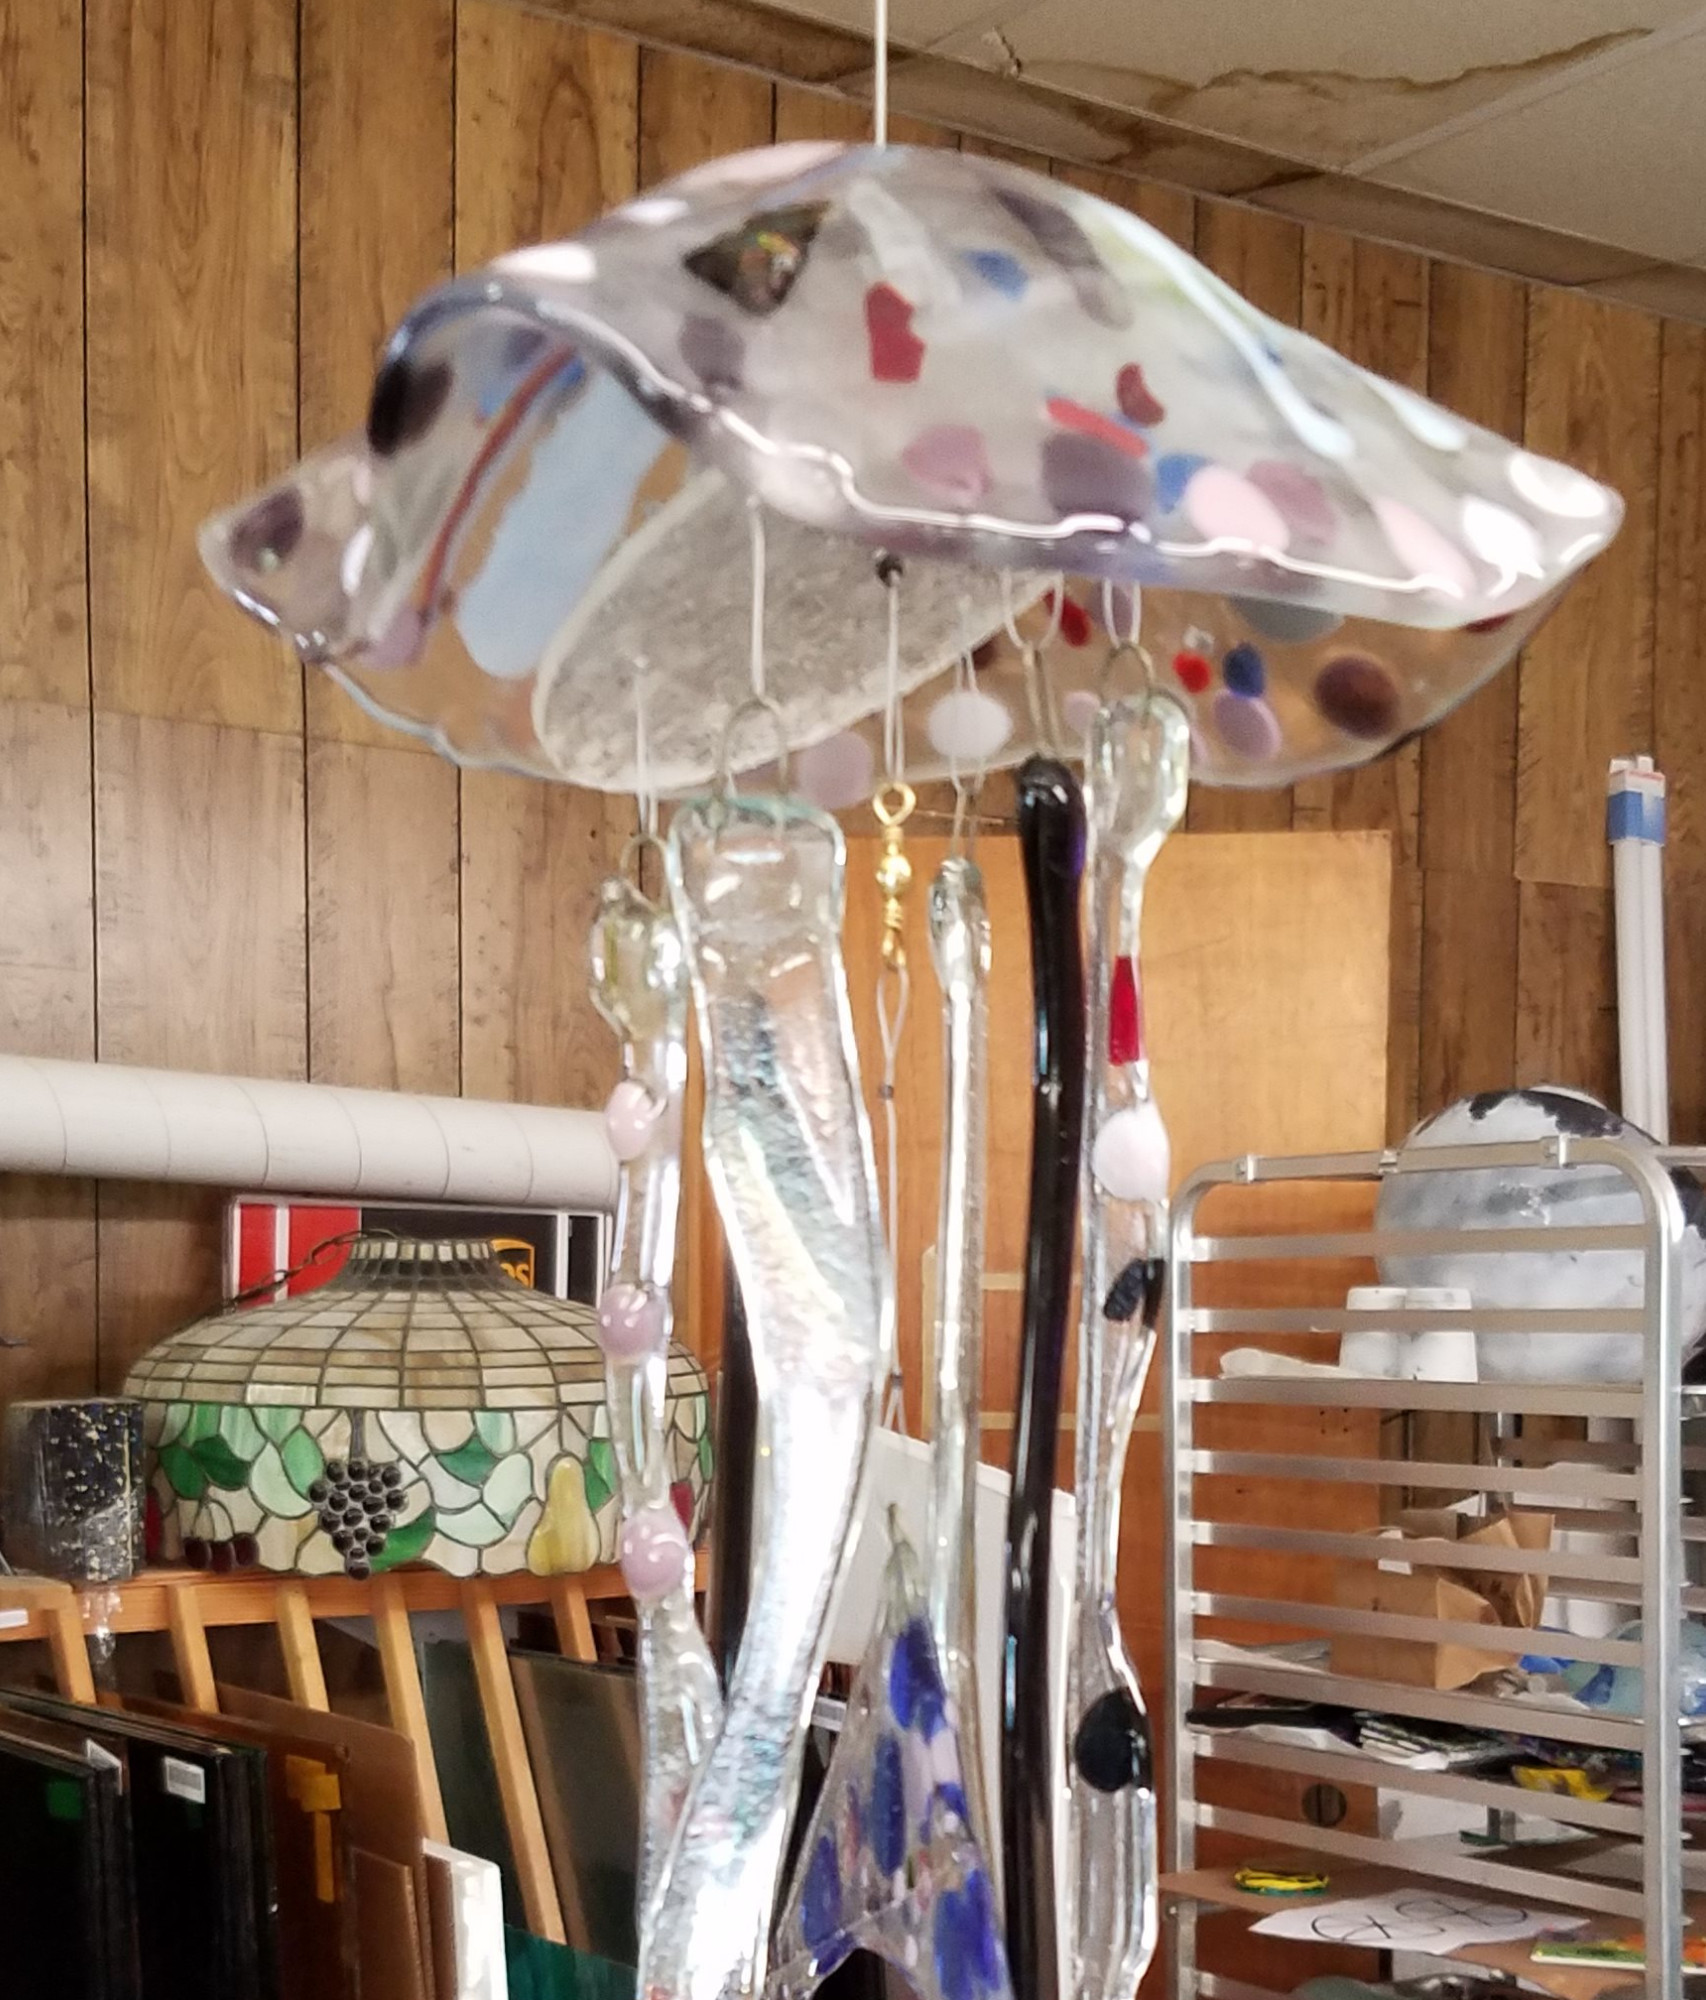 <strong><span style="font-size:20px">Jelly Fish Wind Chimes&nbsp;&nbsp;&nbsp;&nbsp; 8/10 @ 1:30pm</span></strong>